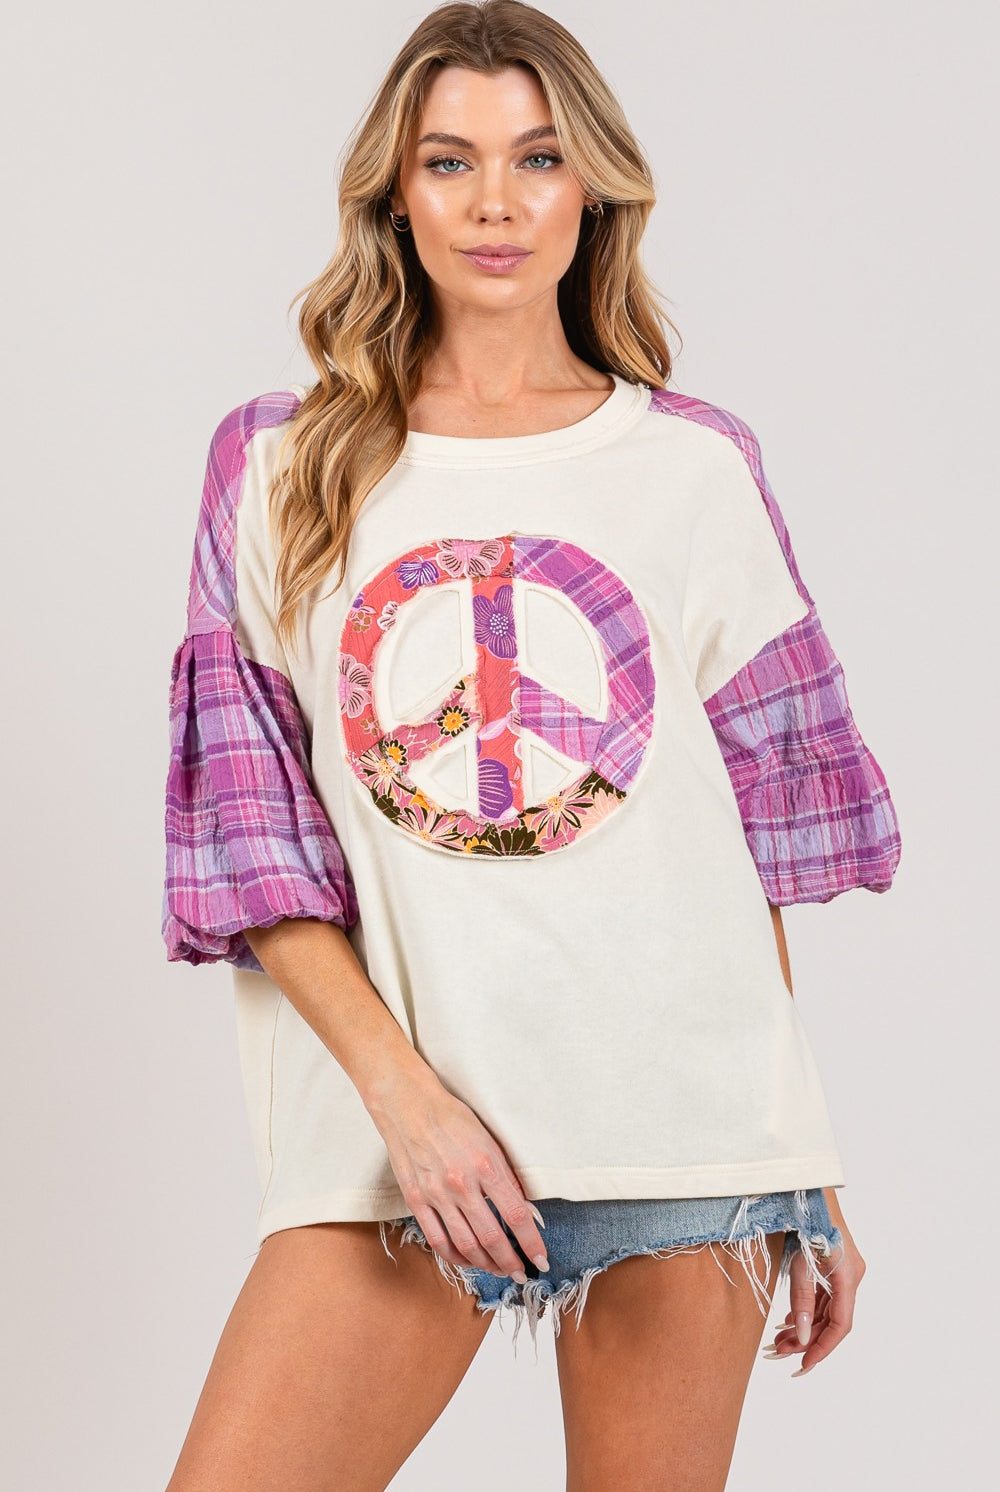 Woman in a casual peace sign top with plaid sleeves, perfect for a stylish contrast look.